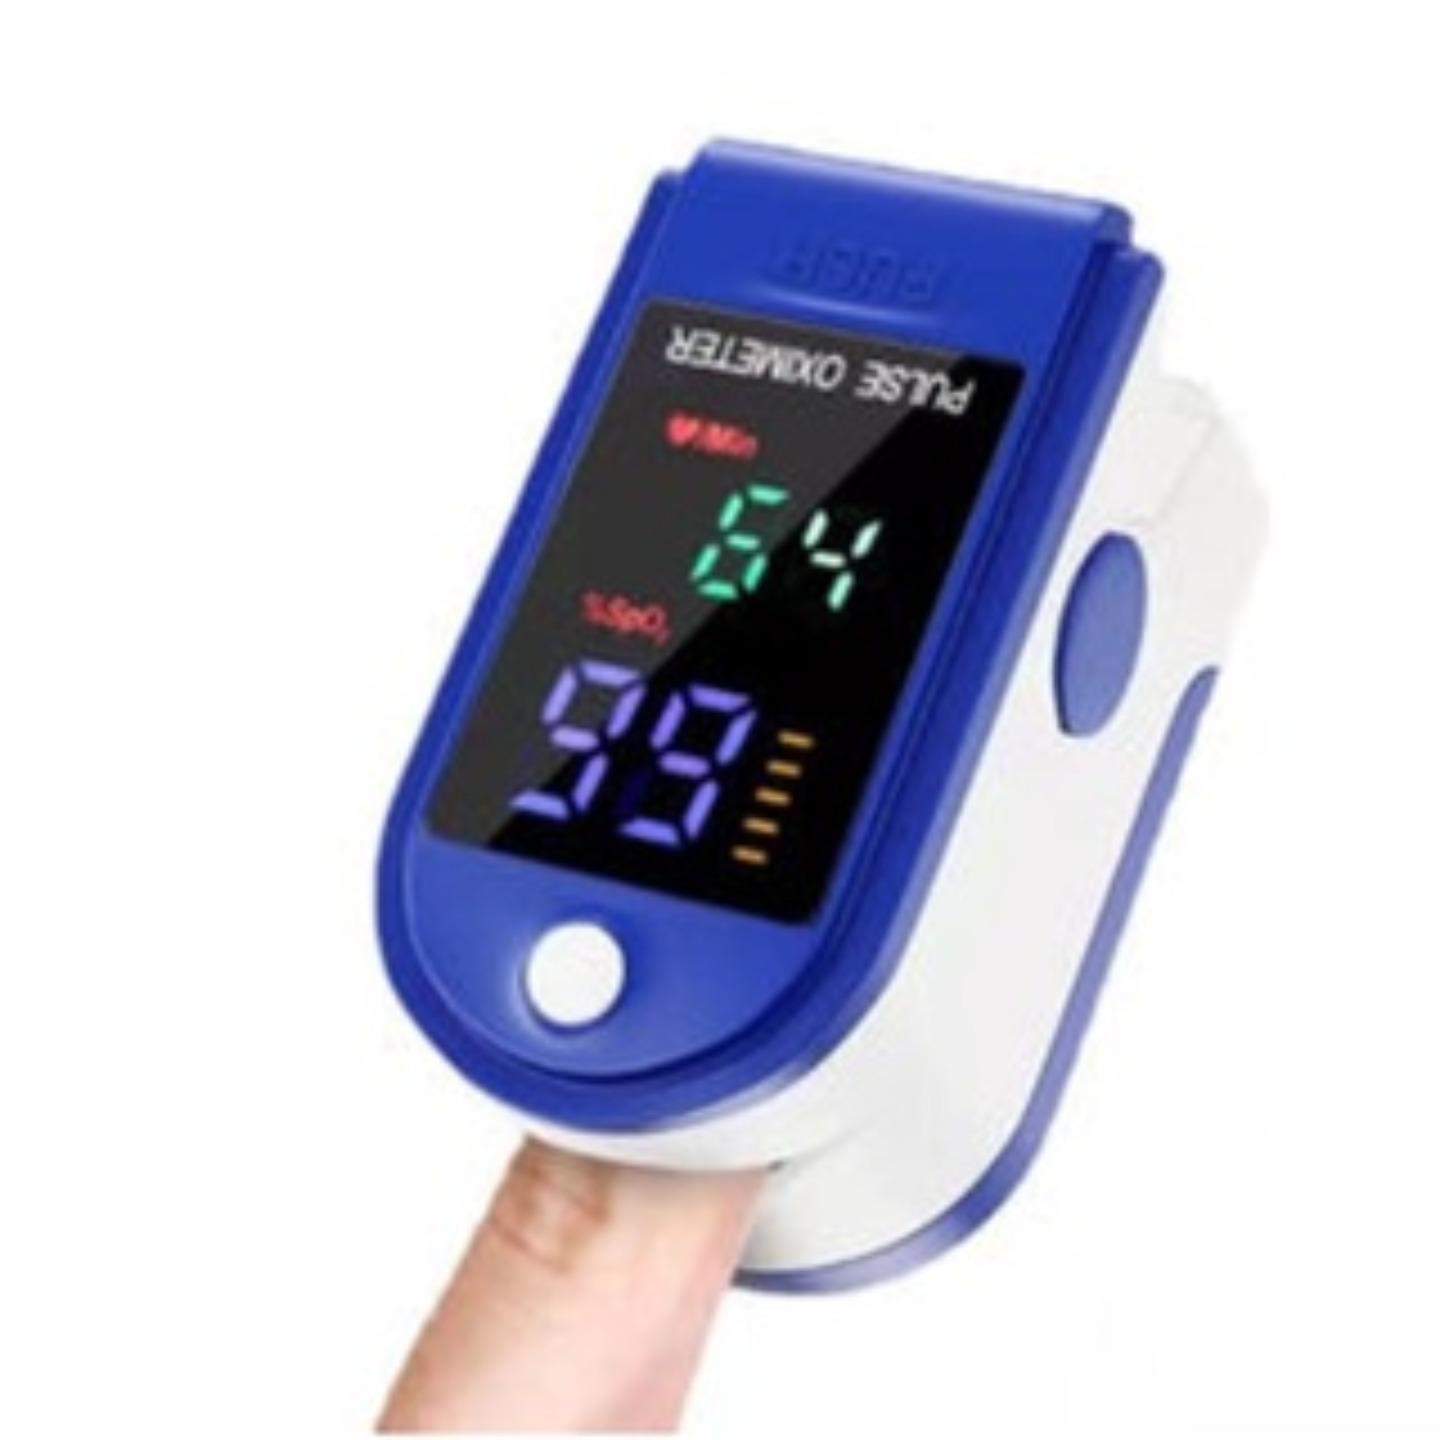 PULSE OXIMETER PULSE RATE, AND PULSE BAR GRAPH READINGS